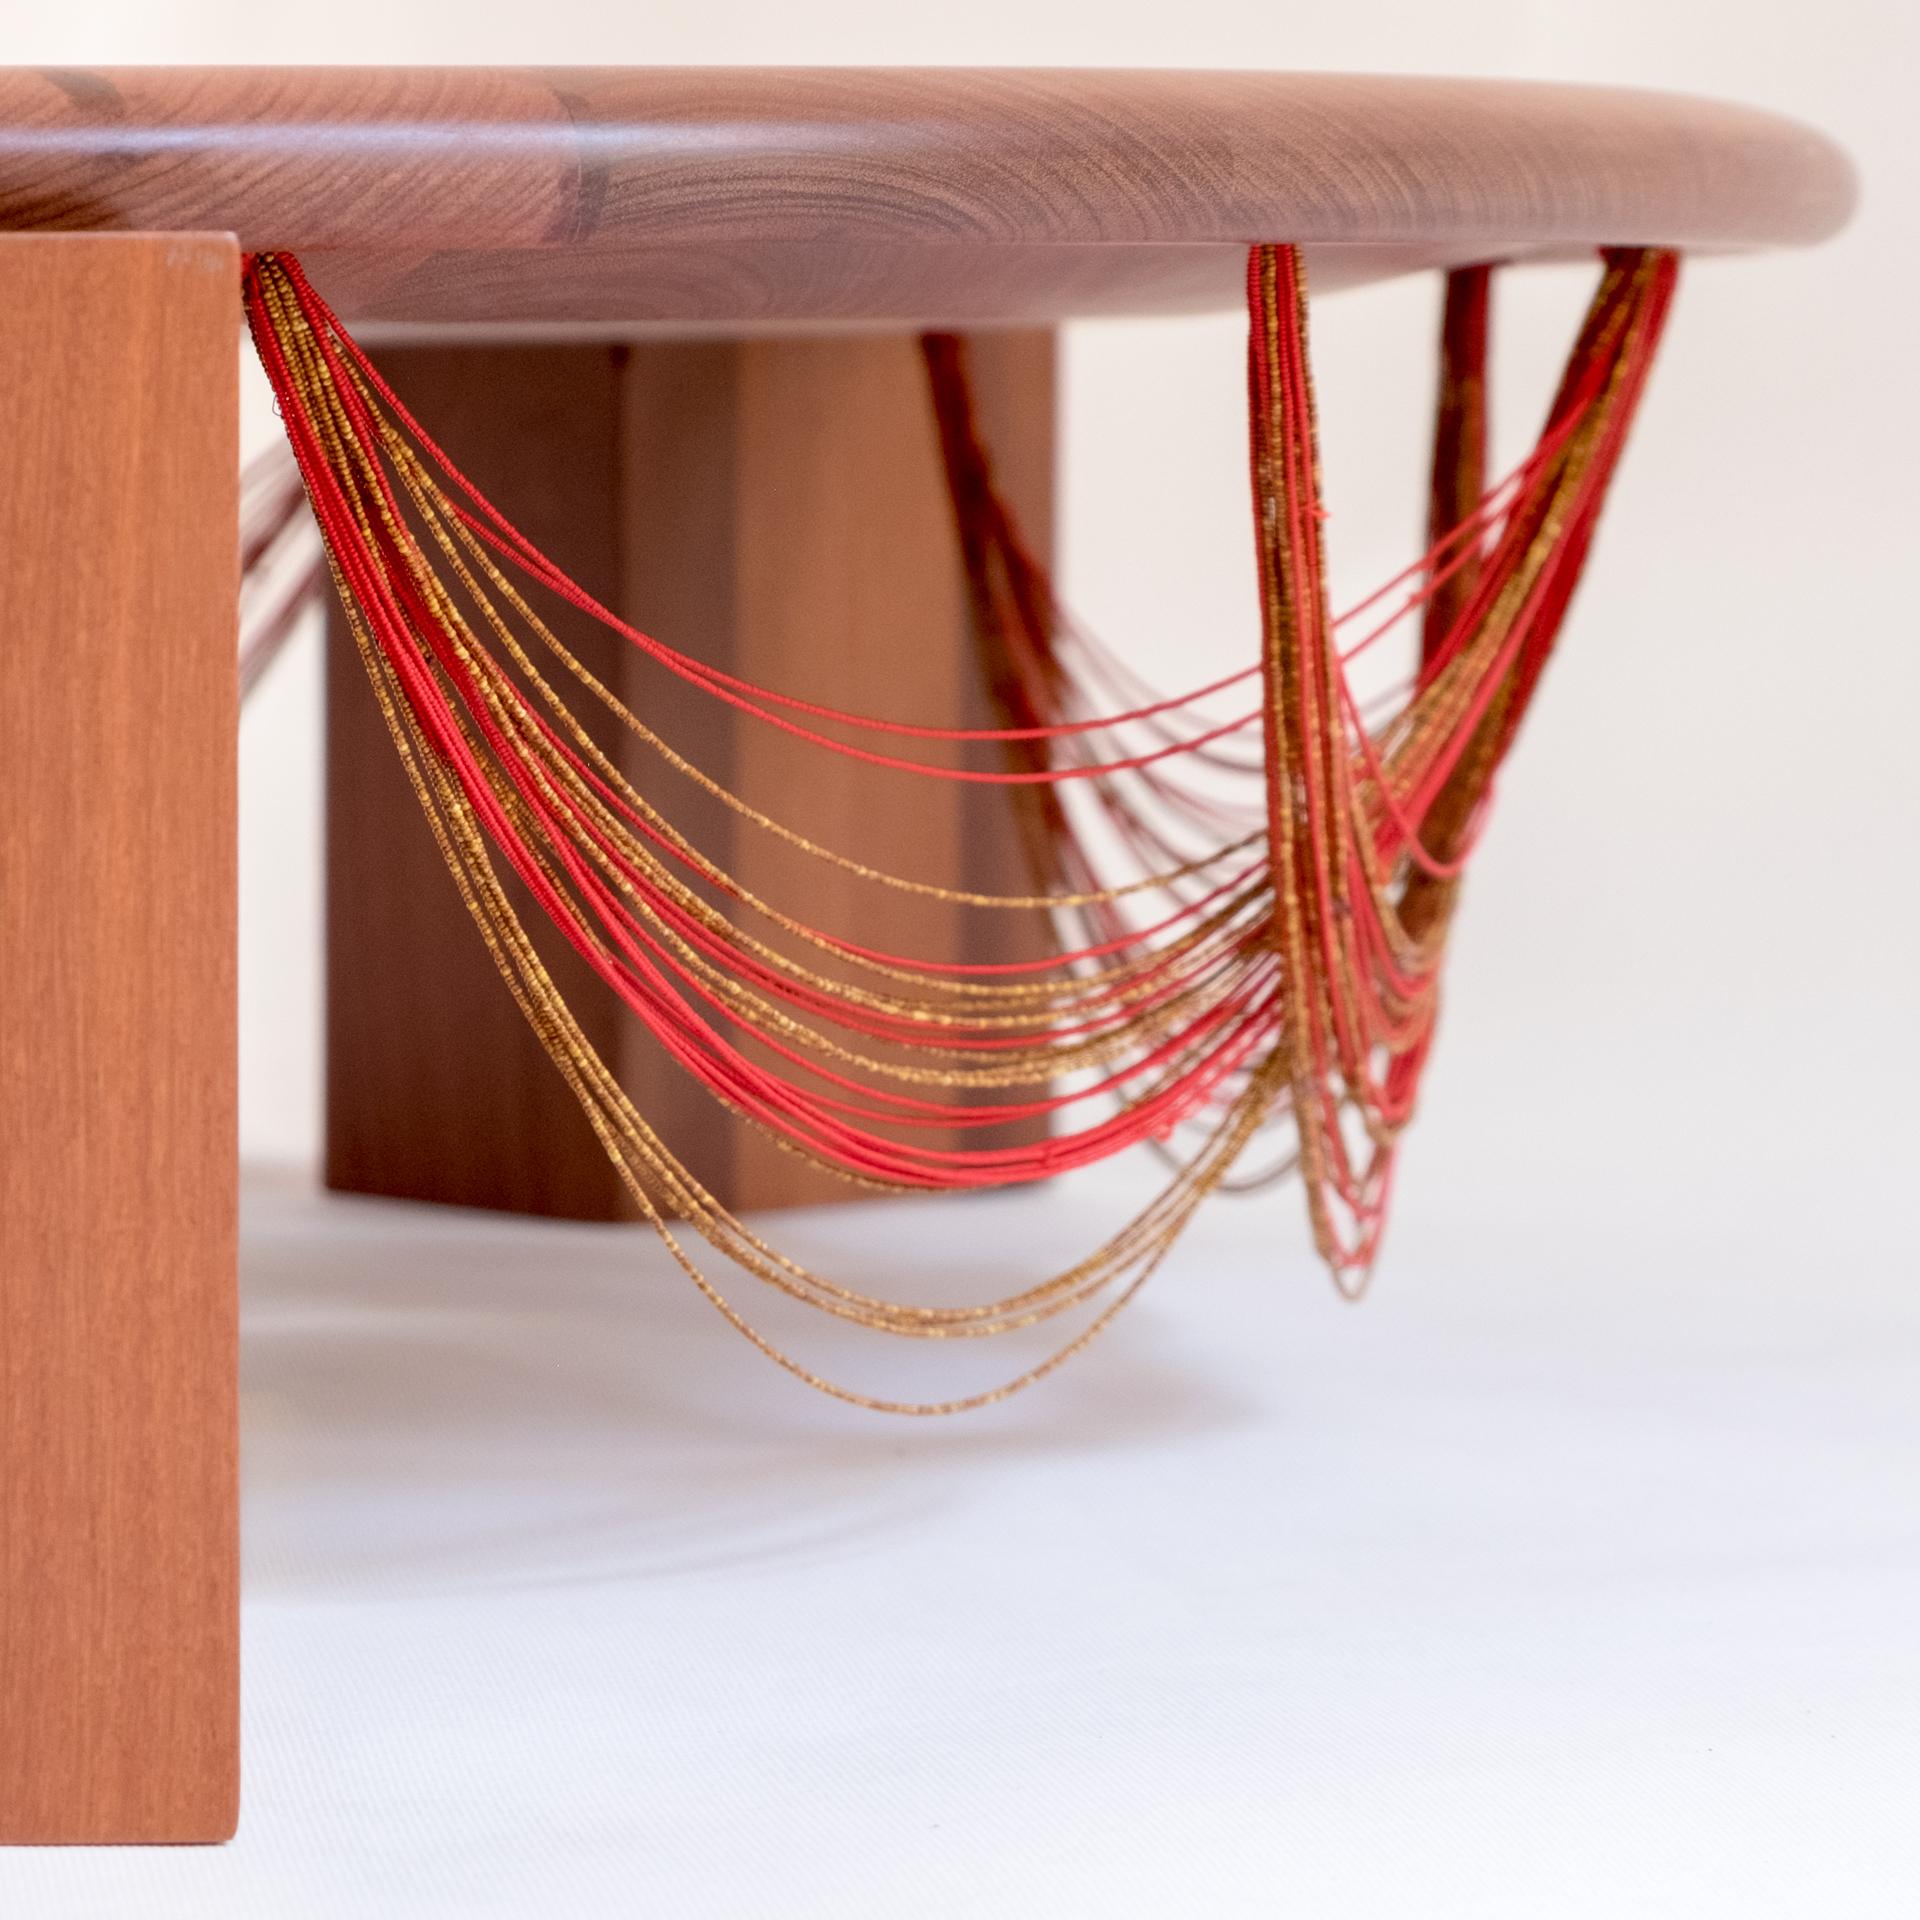 The Beiju Center Table is tribute to Mehinaku indigenous women. Made in Cabreúva wood it receives tiny beads necklaces made by them to be used in the traditional rituals of their people, in the Xingu Indigenous Territory, Mato Grosso, Brazil.

All